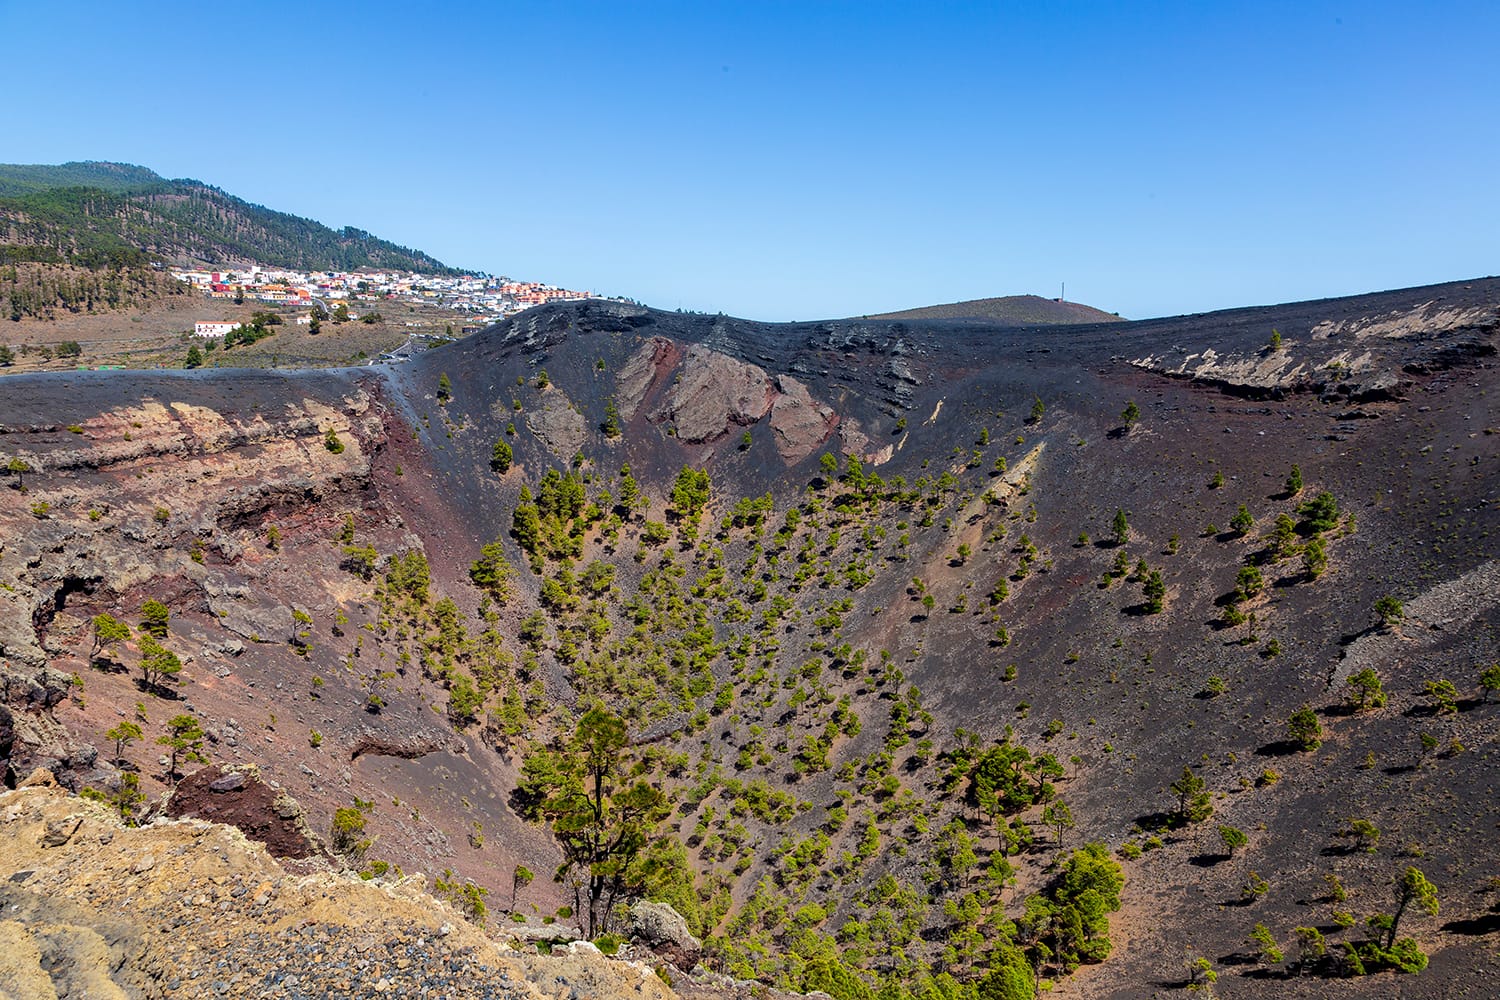 View of the San Antonio volcano crater with fuencaliente village in background. La Palma, Canary Islands. Spain.